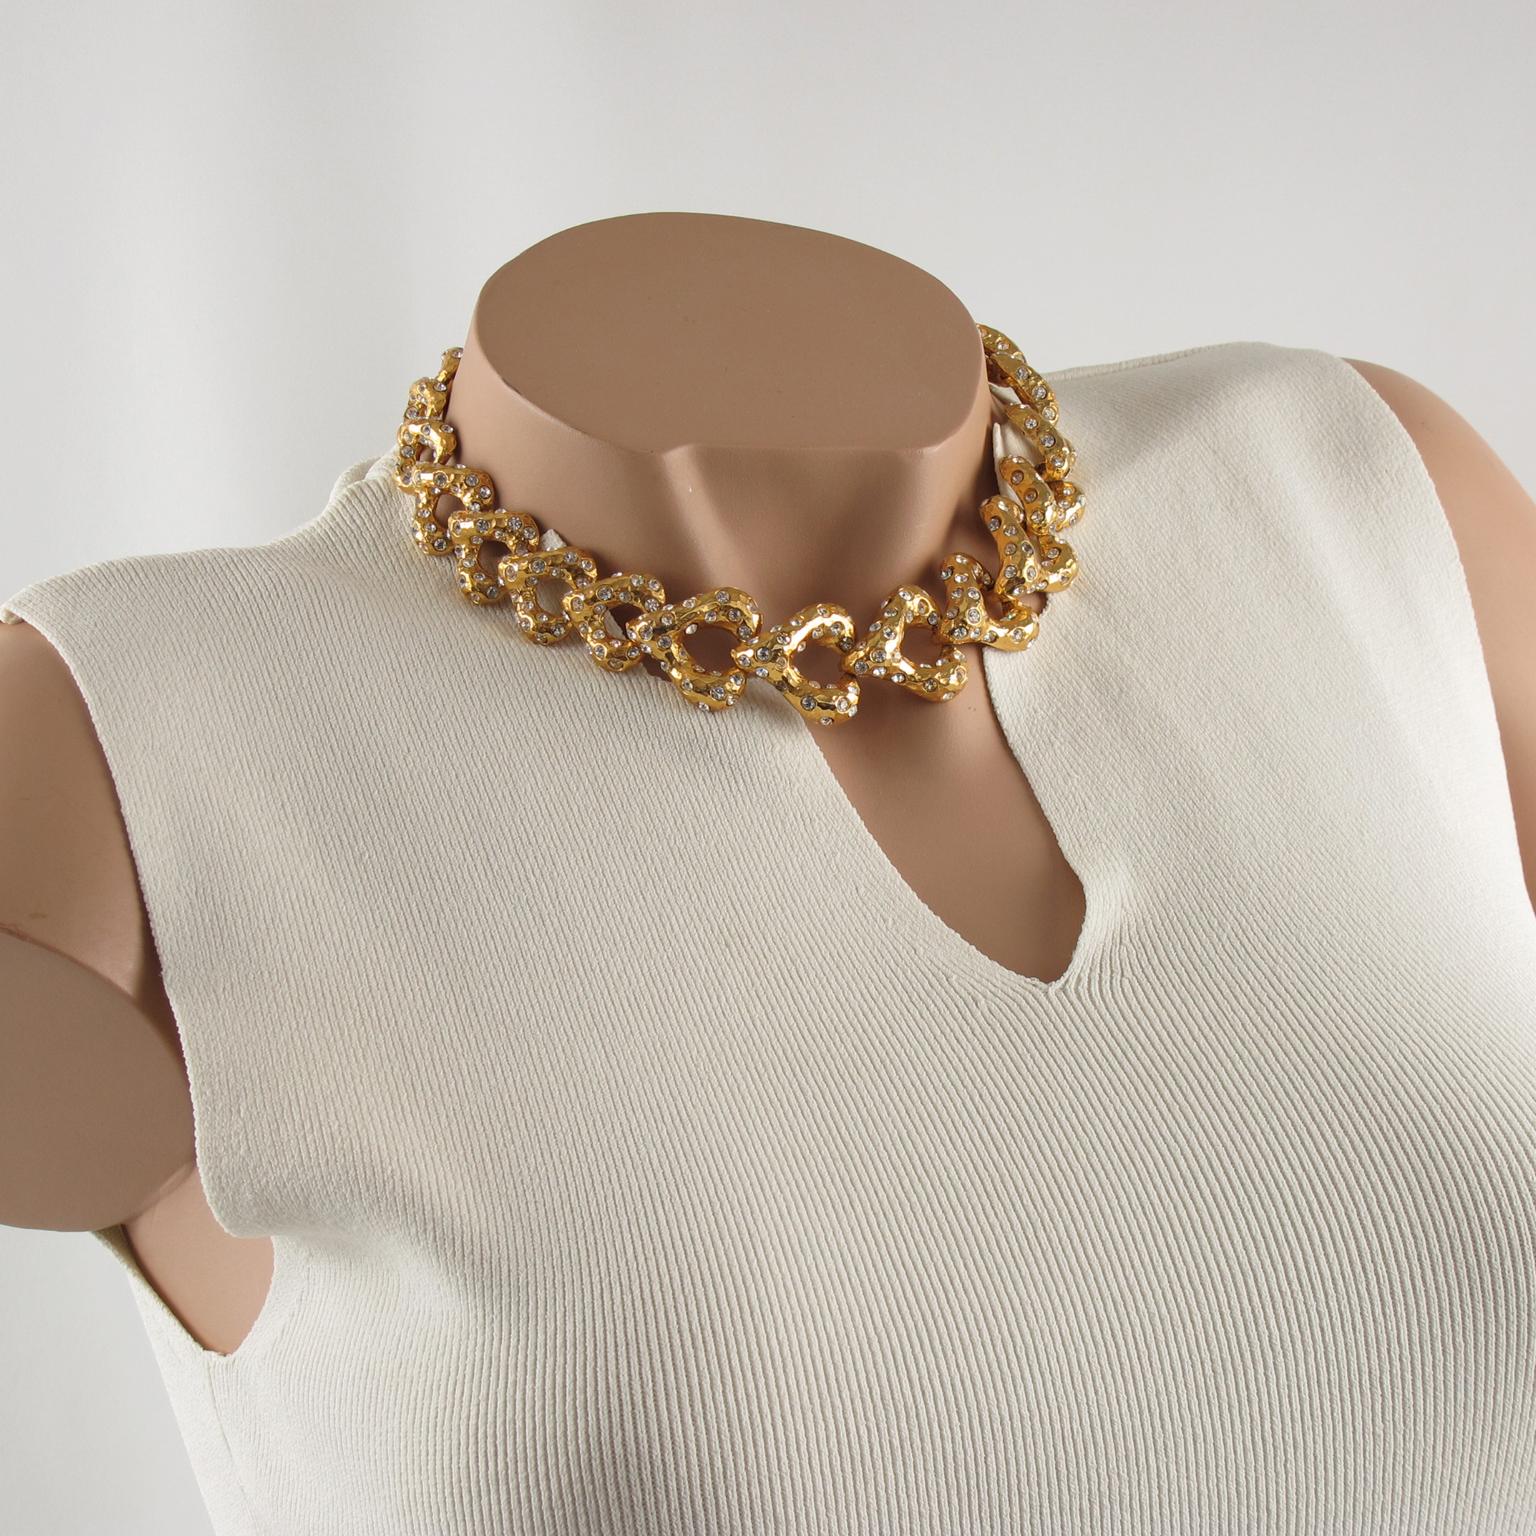 Lovely French designer Alexis Lahellec Paris choker necklace. Freeform dimensional heart shape with gilt metal all textured paved with tiny clear crystal rhinestones. Fold-over closing clasp. Signed at the clasp with a tiny gilded tag 